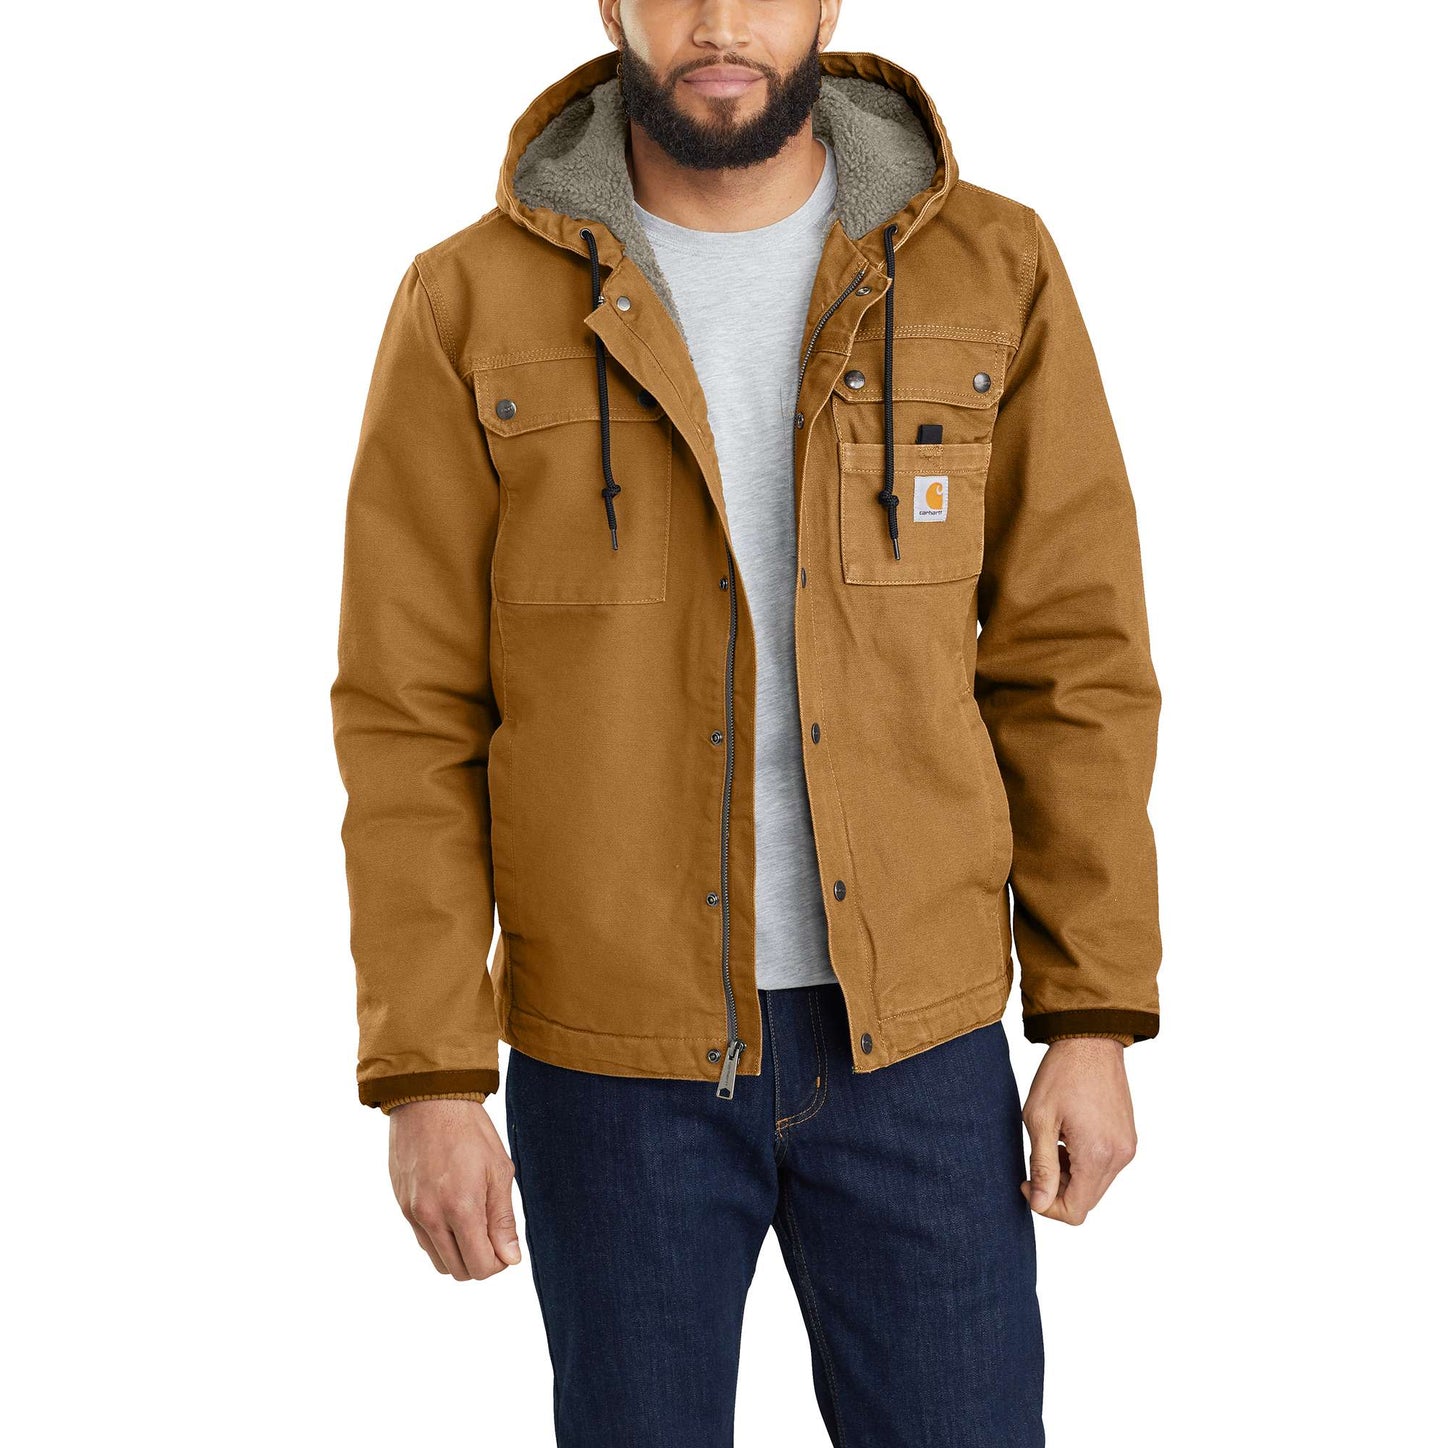 Relaxed Fit Washed Duck Sherpa-Lined Jacket - Stampede Tack & Western Wear